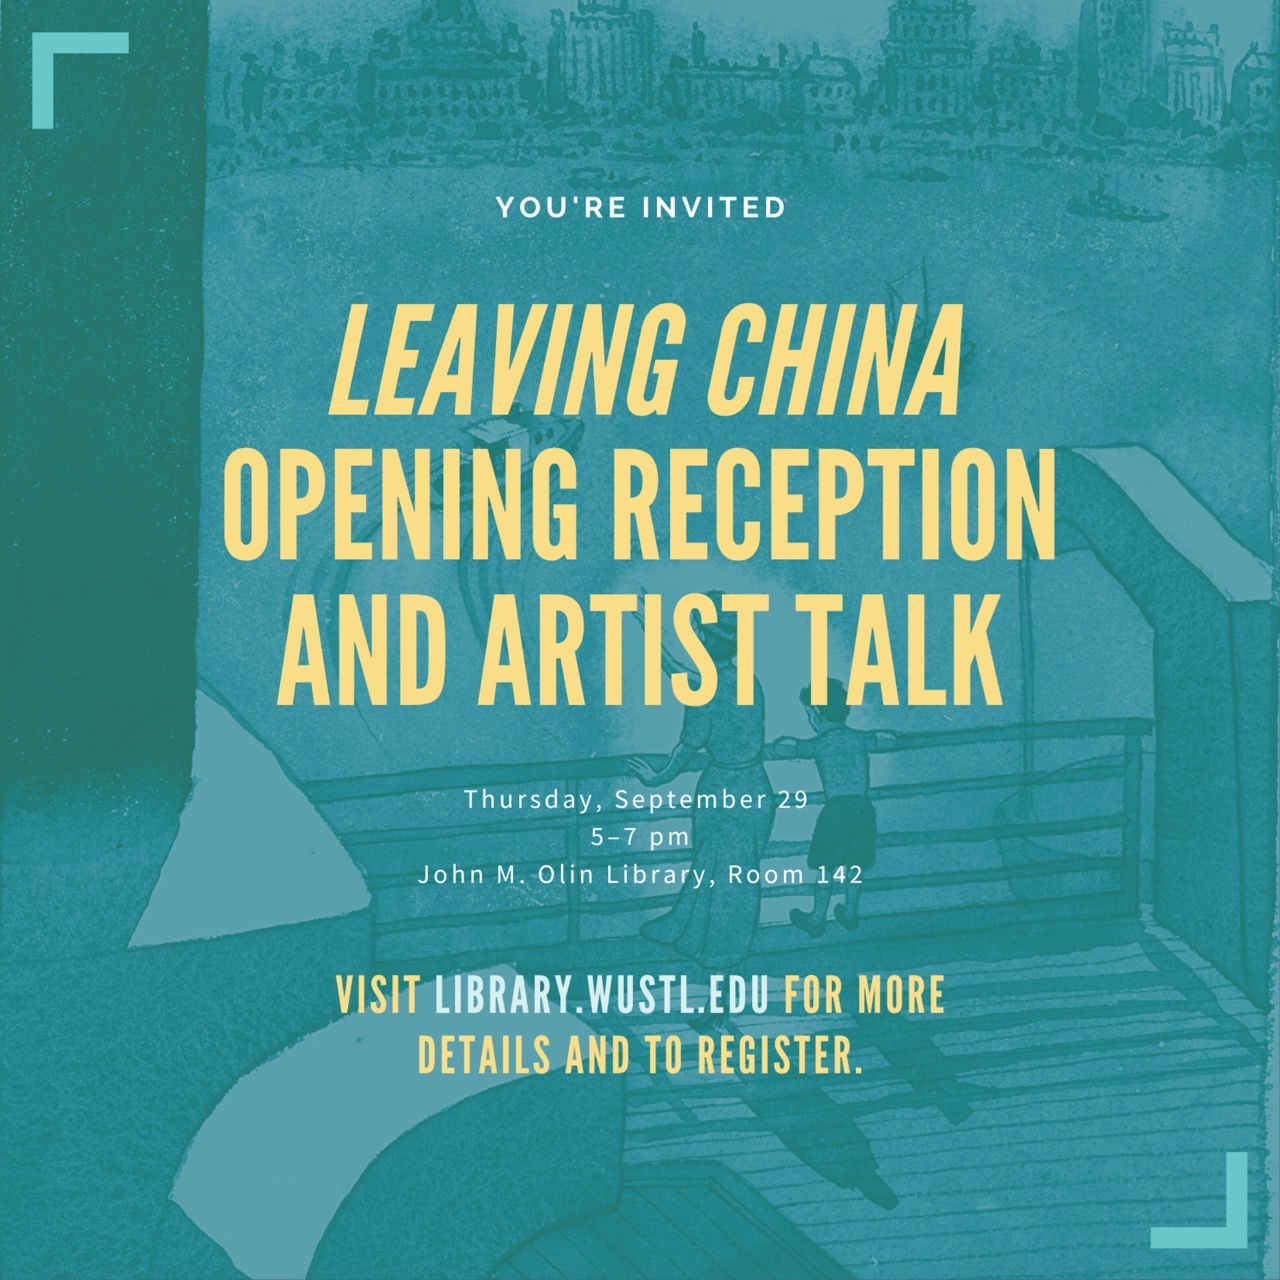 Leaving China Opening Reception and Artist Talk